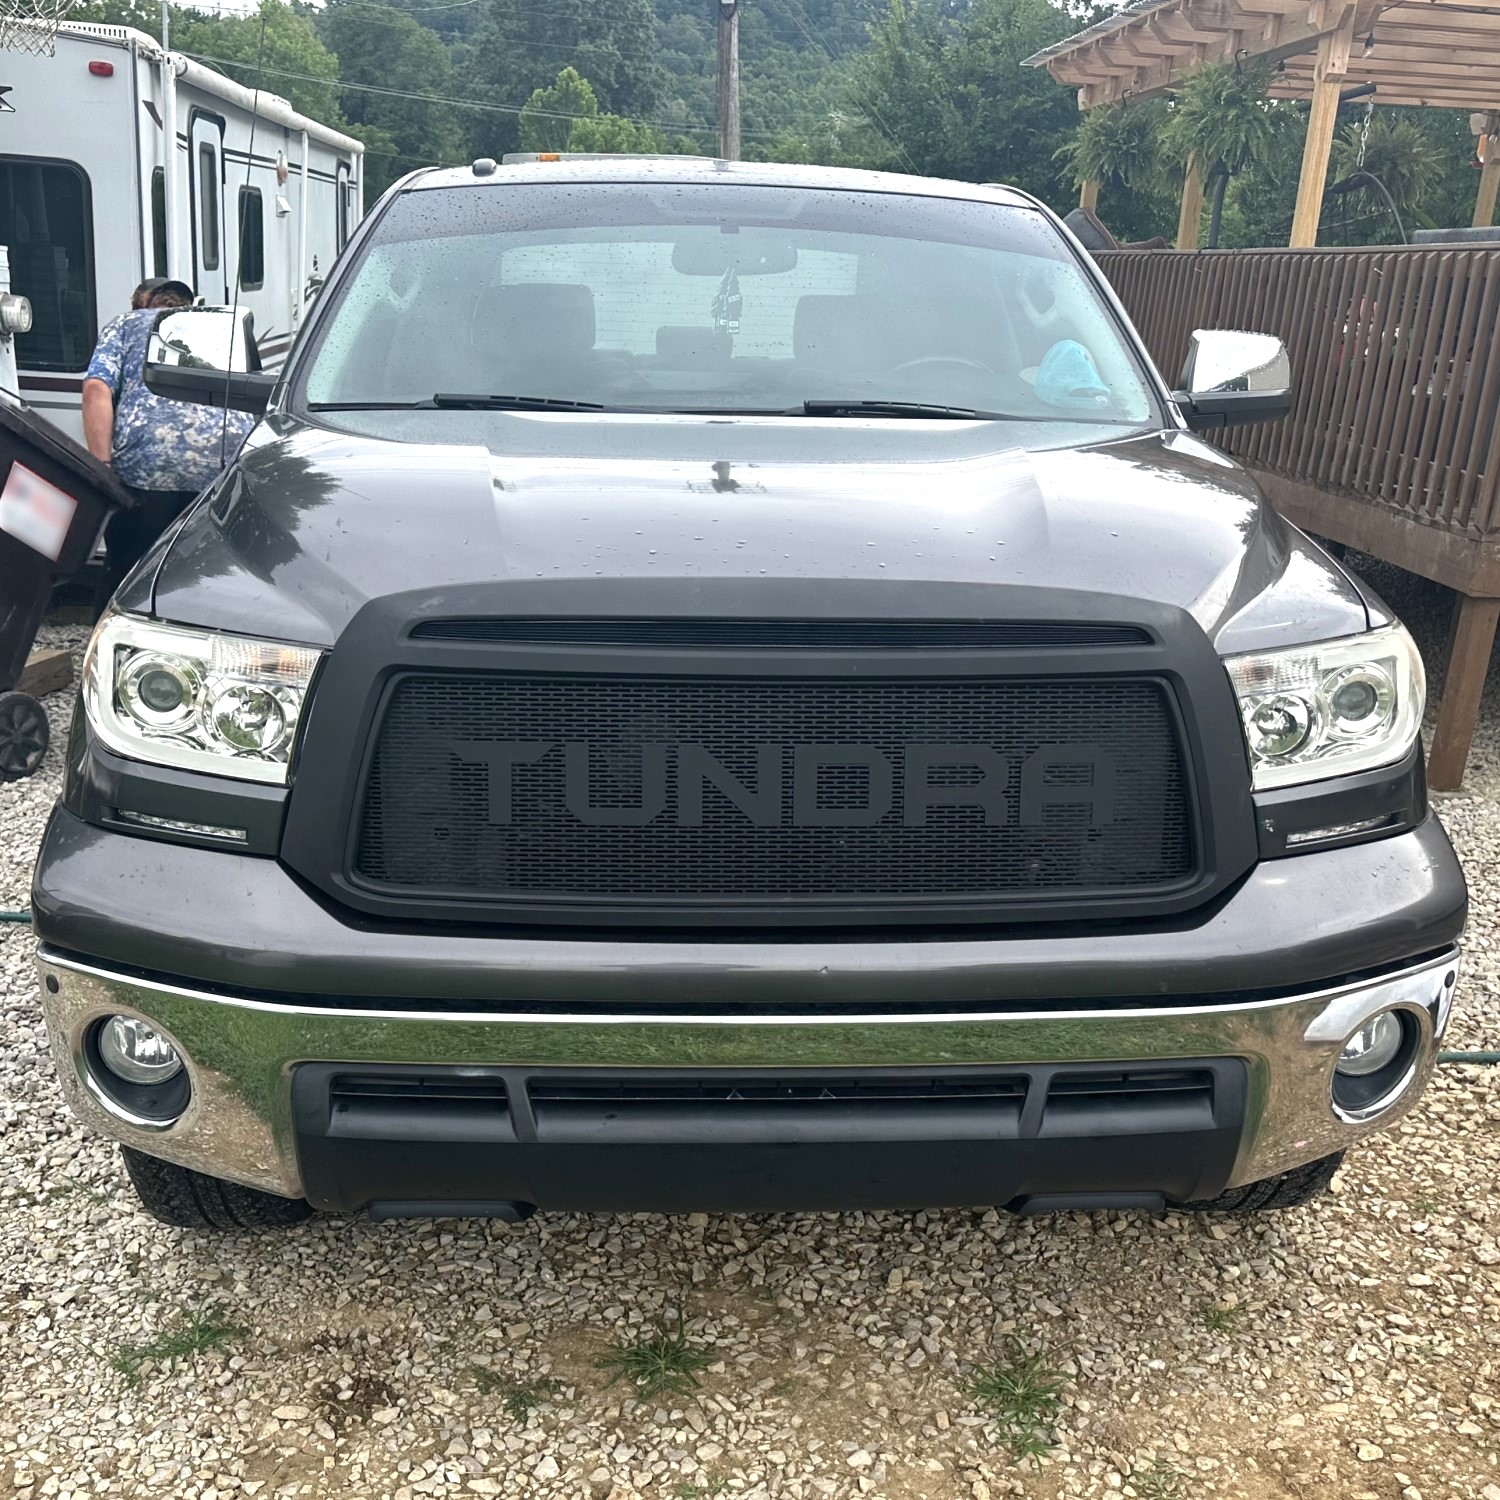 2nd Gen Tundra has a Big Grille - Looks Even Better with Big Mesh Piece and Big Raptor-Style Lettering